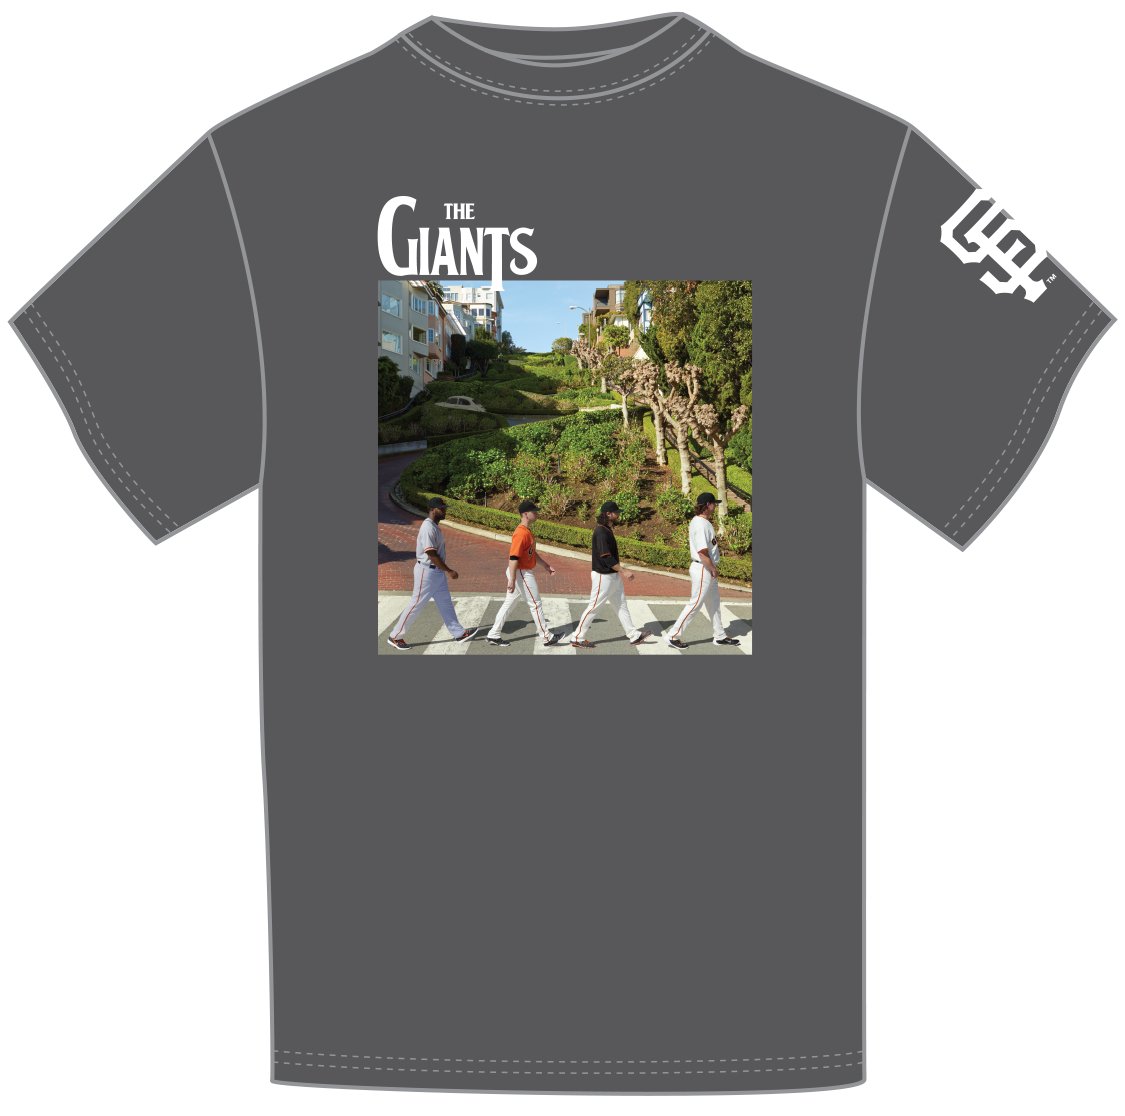 .@thebeatles Night at @ATTParkSF is 8/19! Get this Abbey Road-inspired shirt w/ your ...